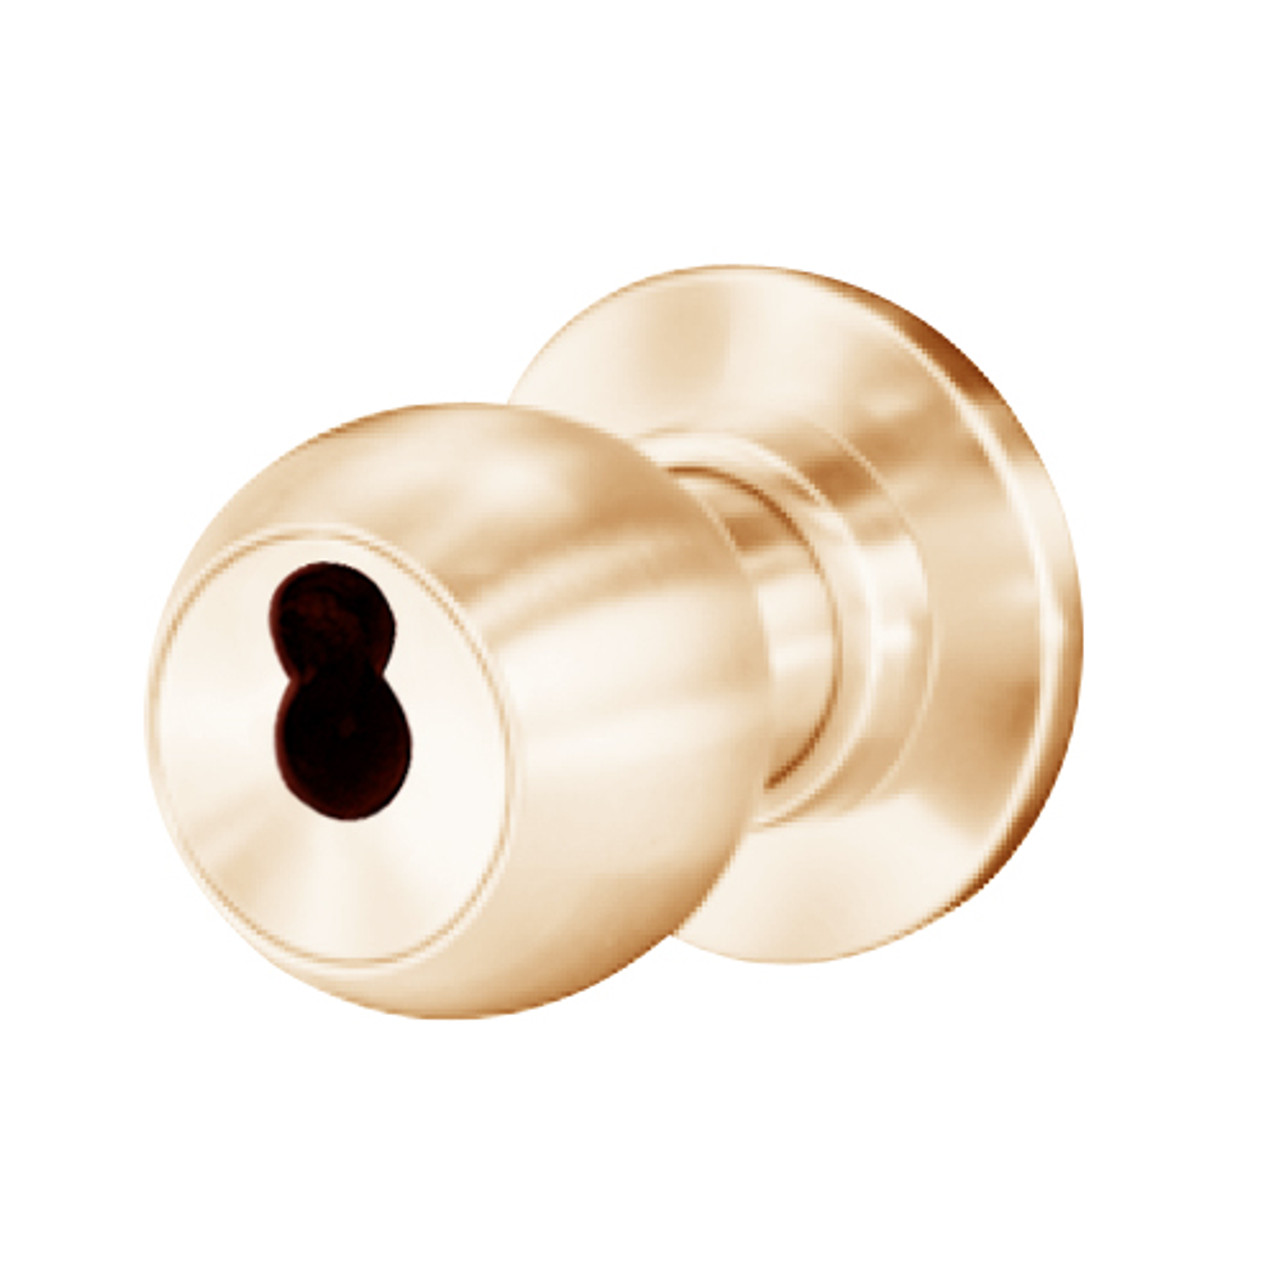 8K37XR4CSTK611 Best 8K Series Special Heavy Duty Cylindrical Knob Locks with Round Style in Bright Bronze